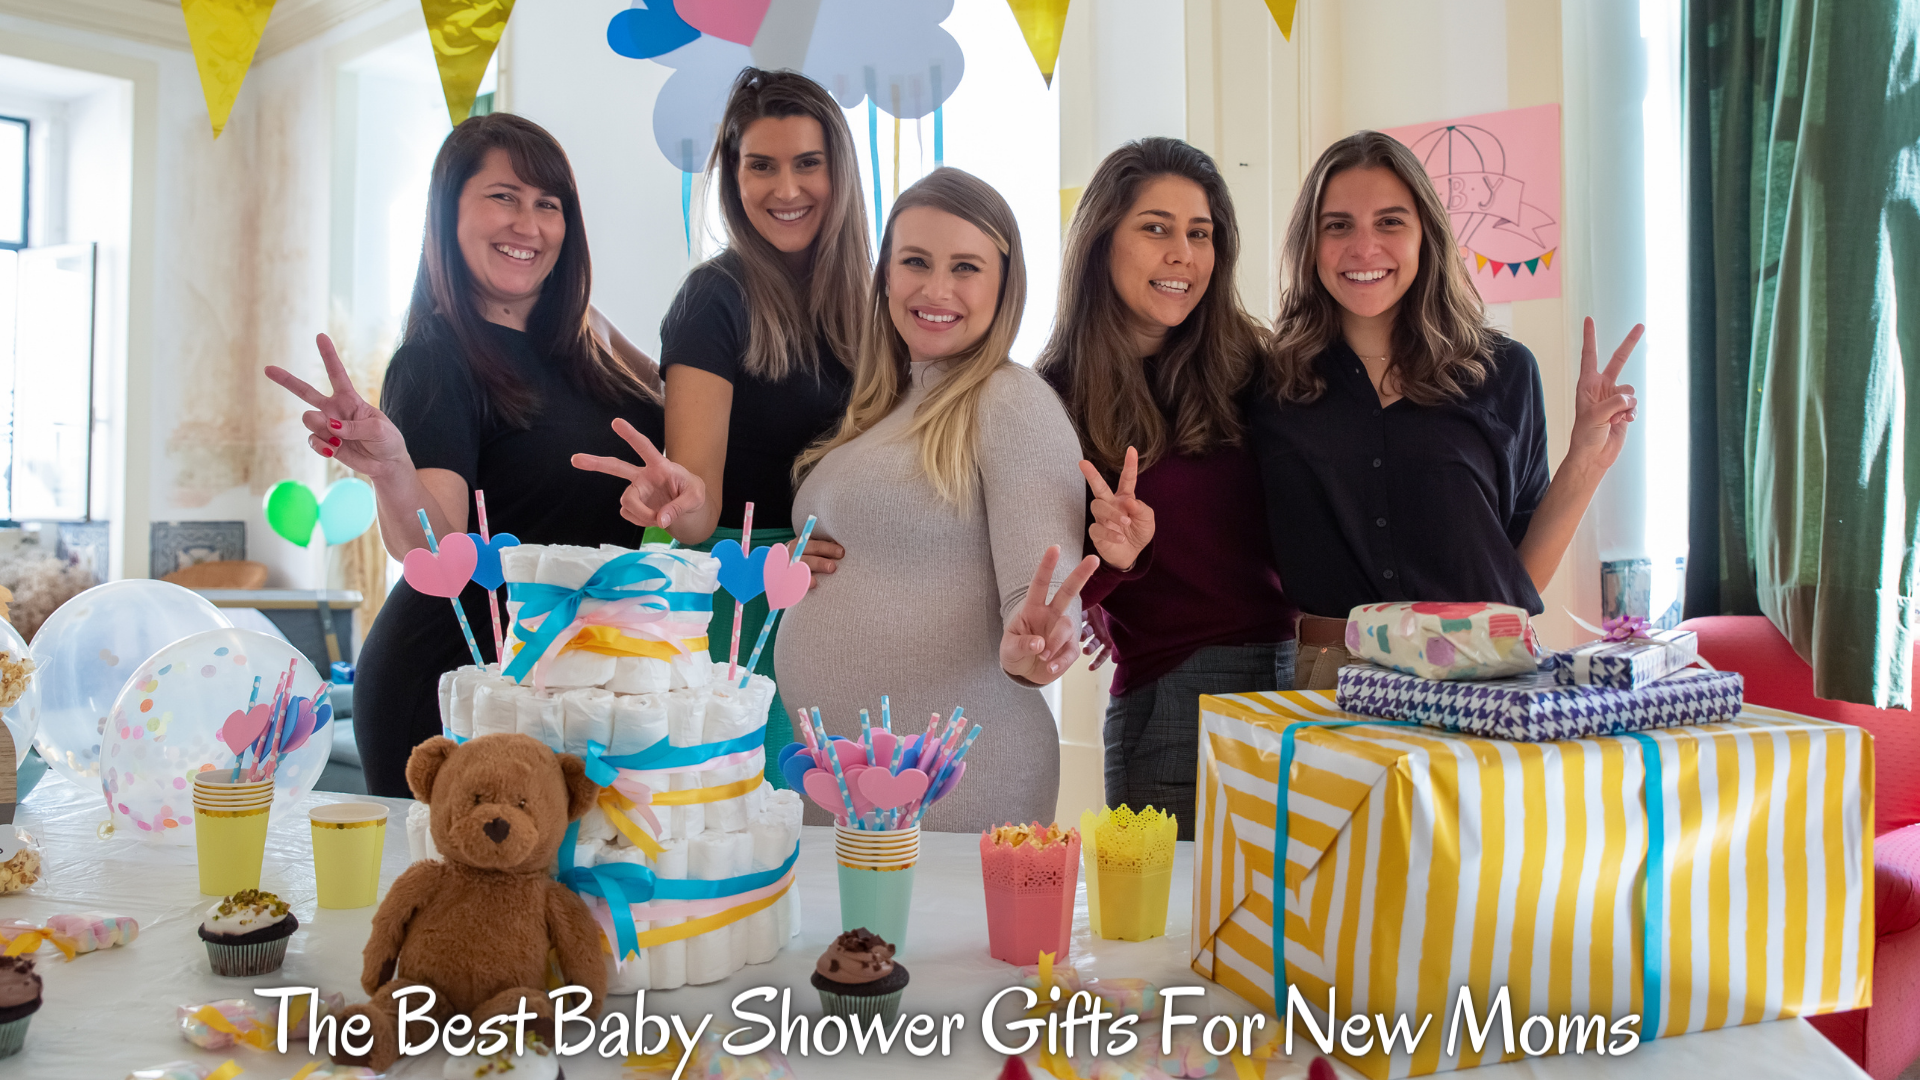 The Best Baby Shower Gifts For New Moms